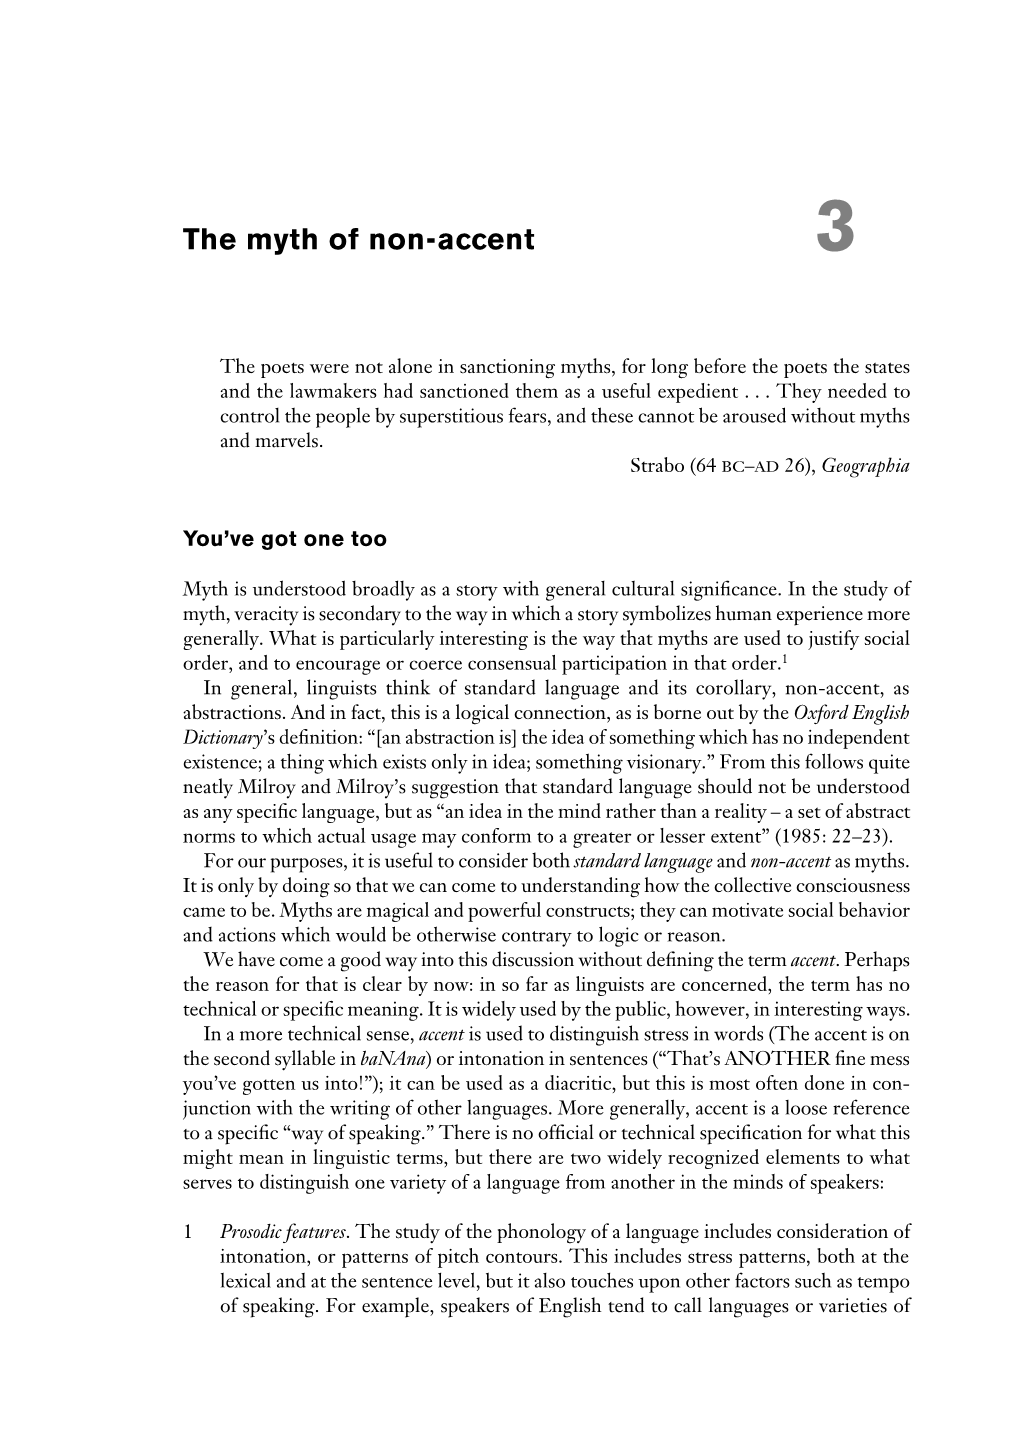 The Myth of the Non-Accent